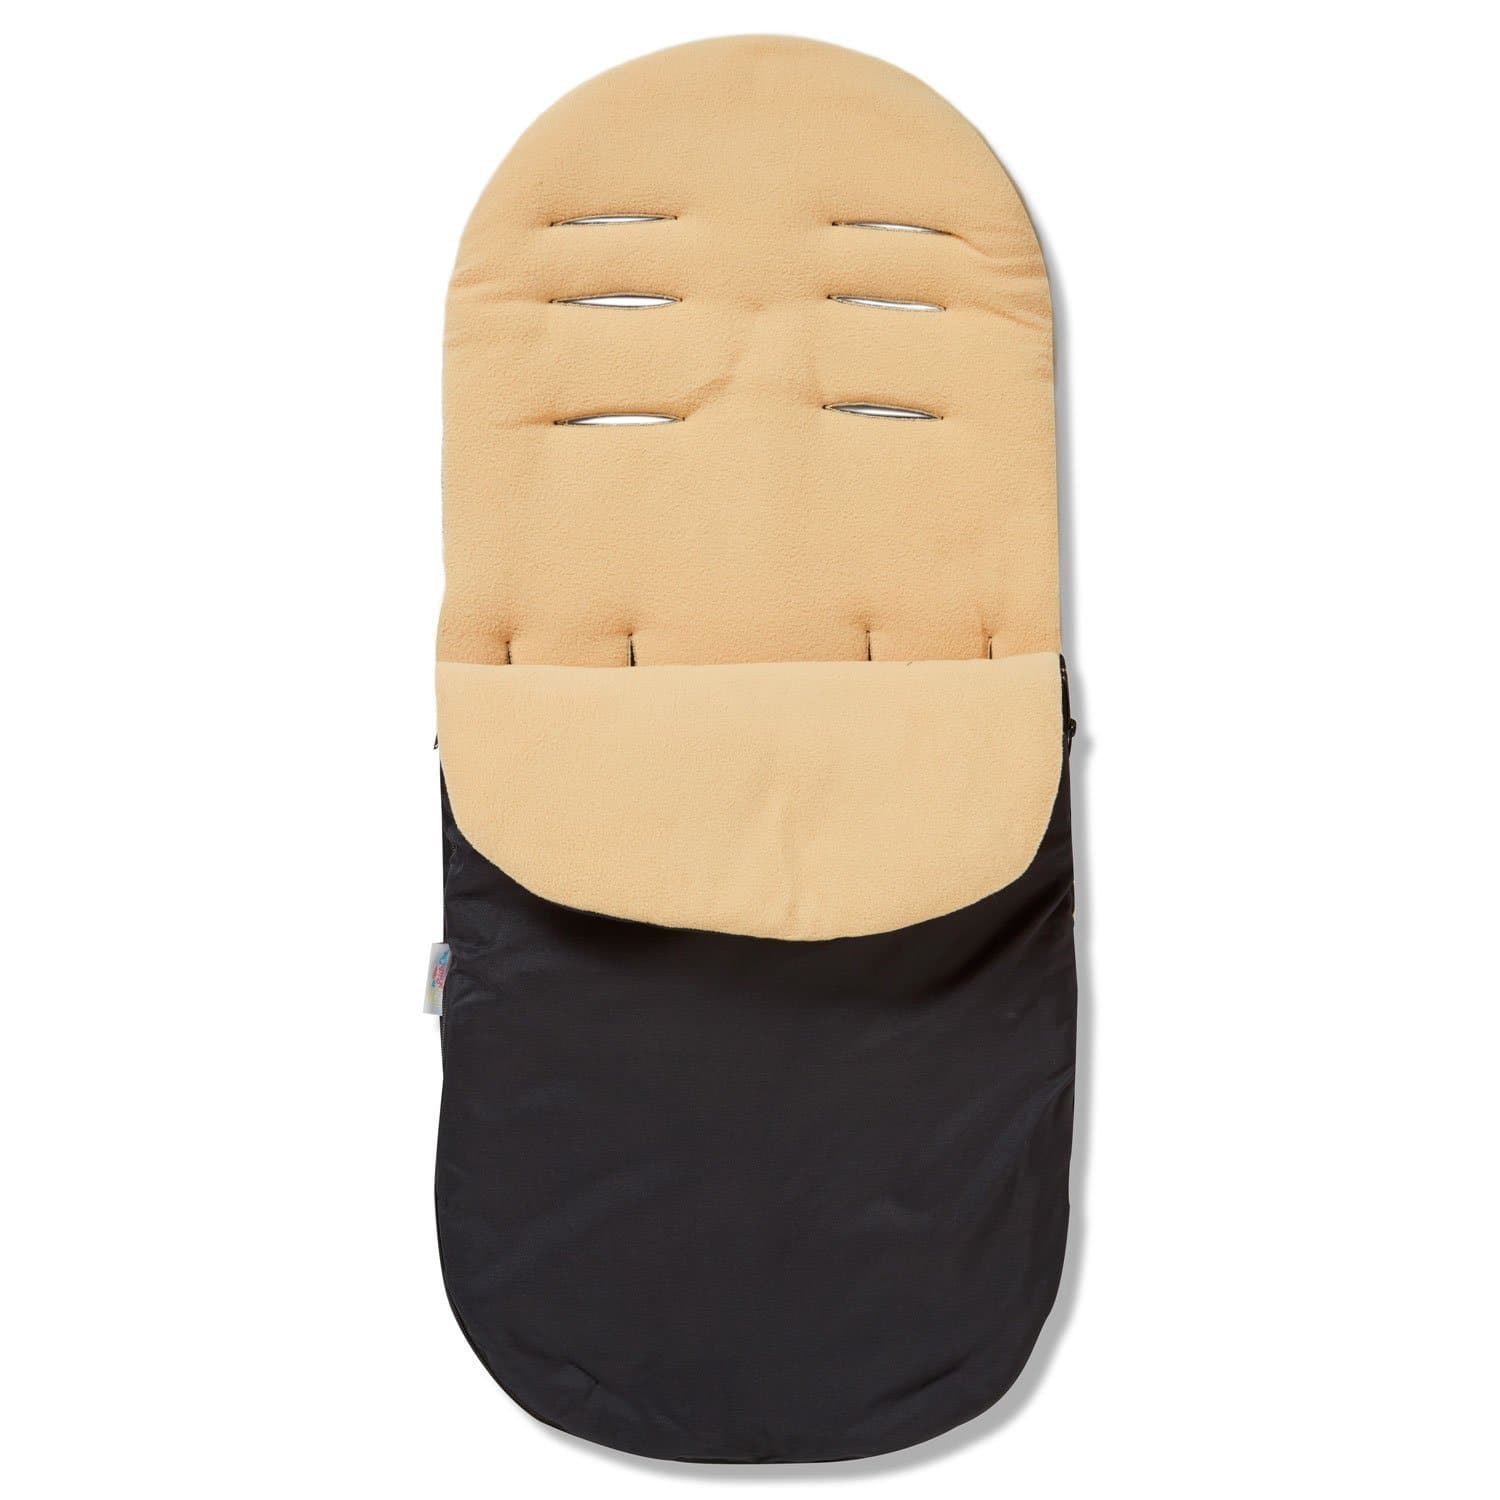 Footmuff / Cosy Toes Compatible with Babylo - Sand / Fits All Models | For Your Little One